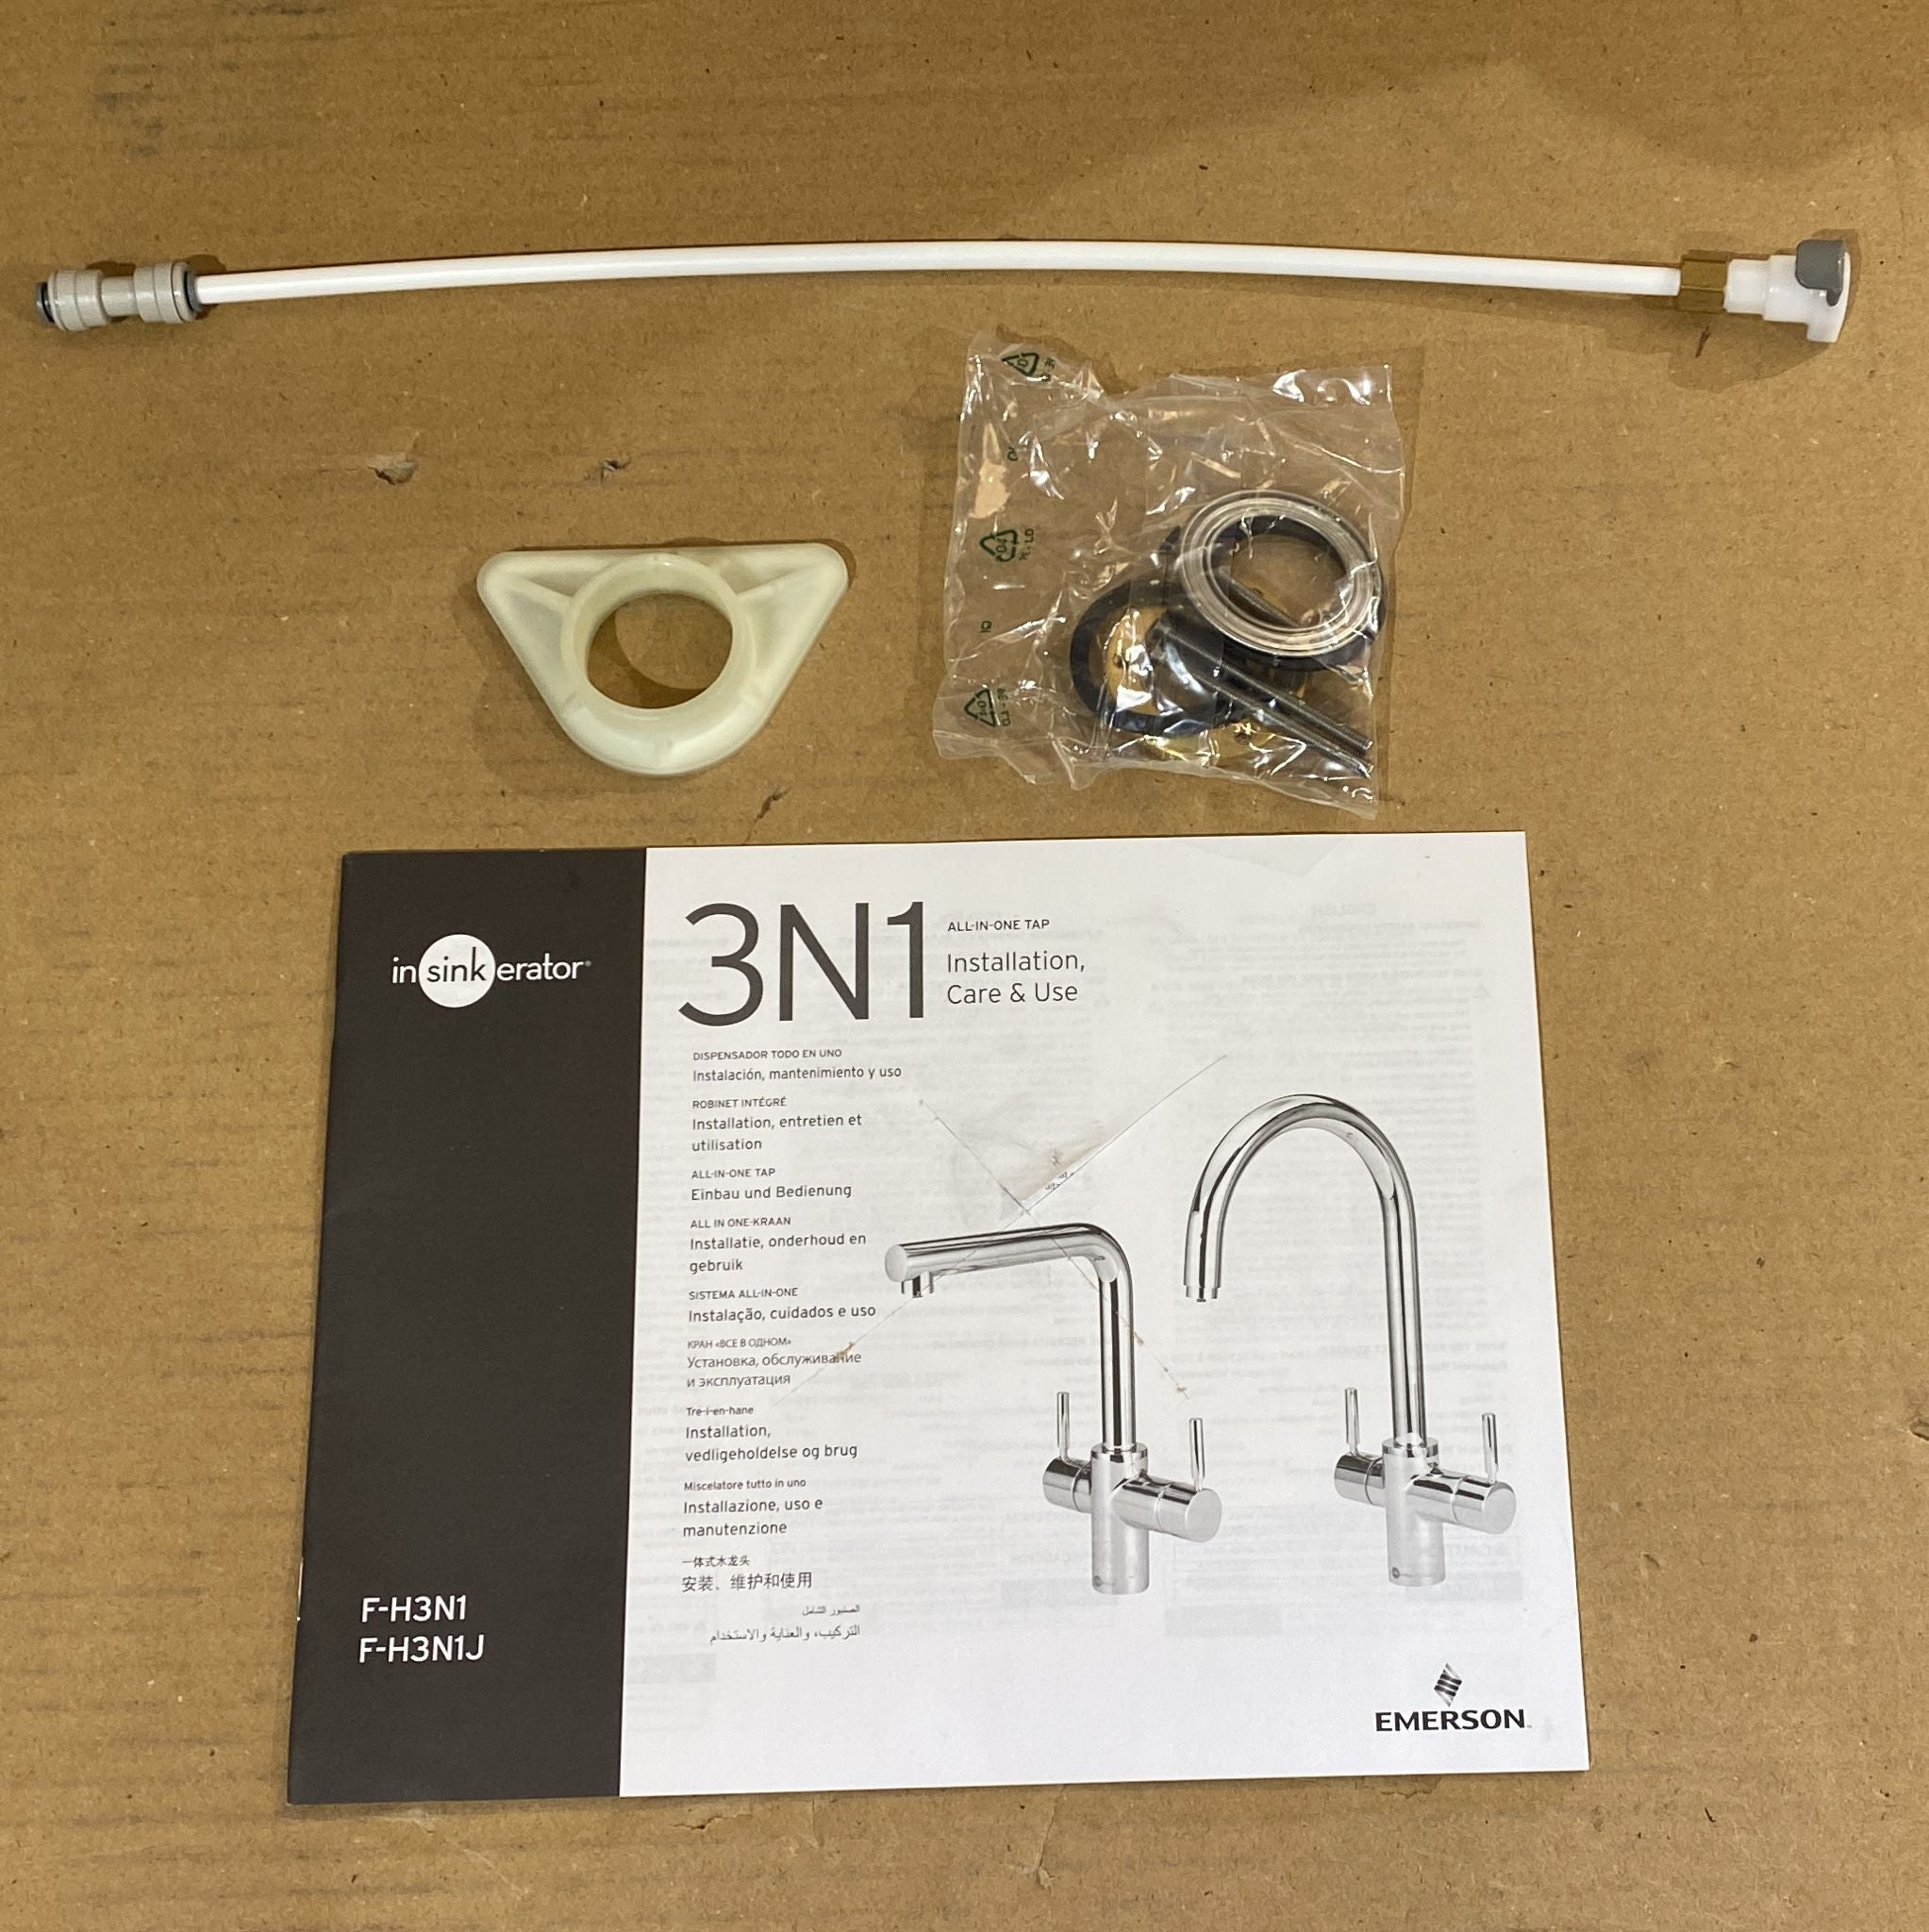 InSinkErator 3N1 Brushed Steel Filtered steaming hot & cold water tap & Neo Tank £300 reduction